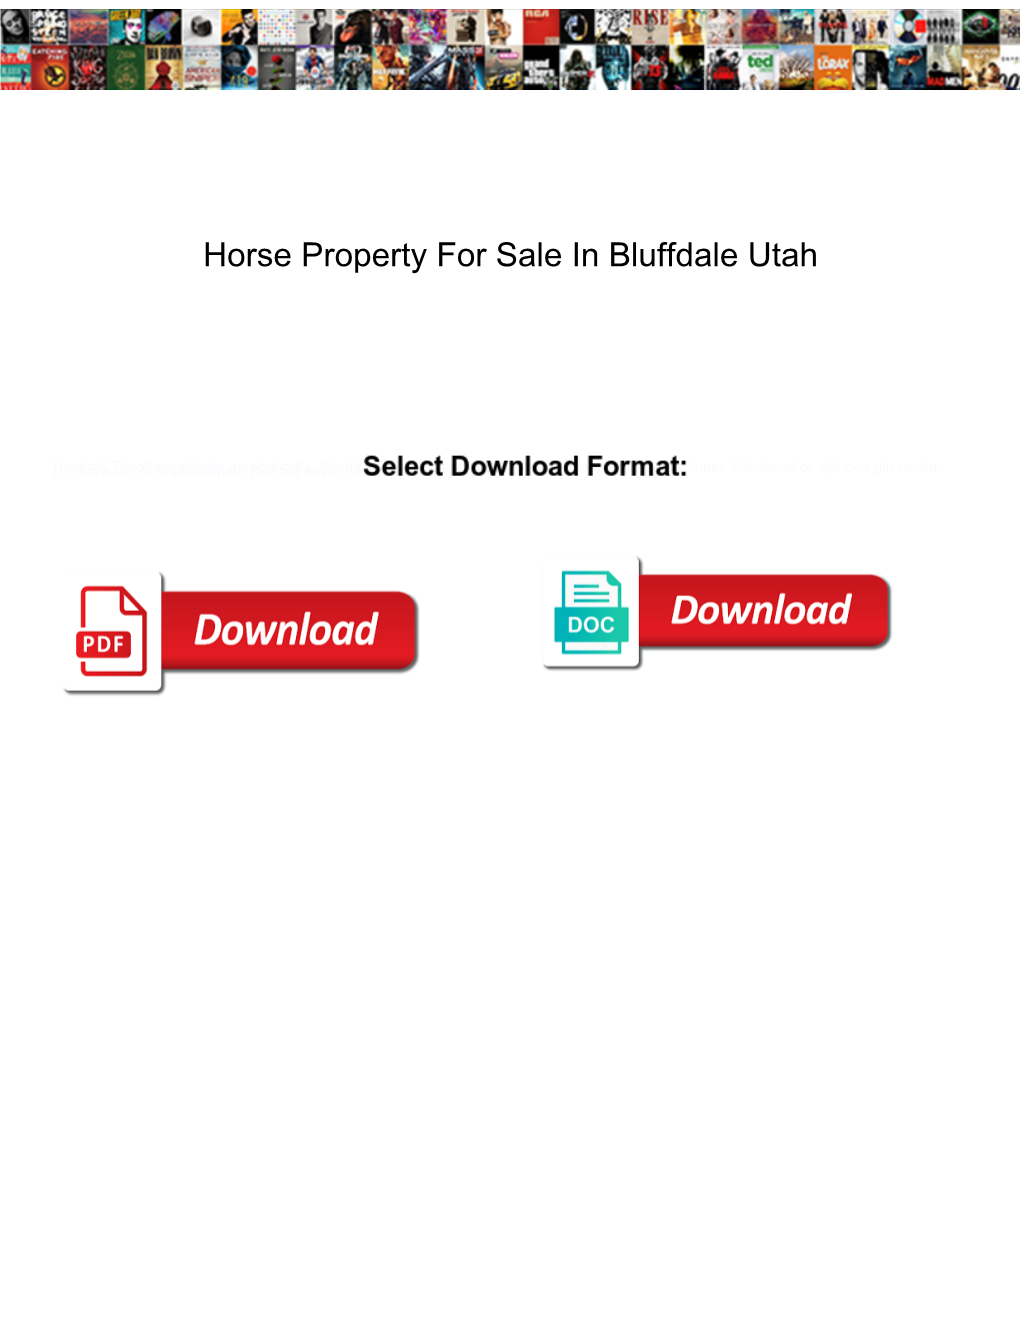 Horse Property for Sale in Bluffdale Utah